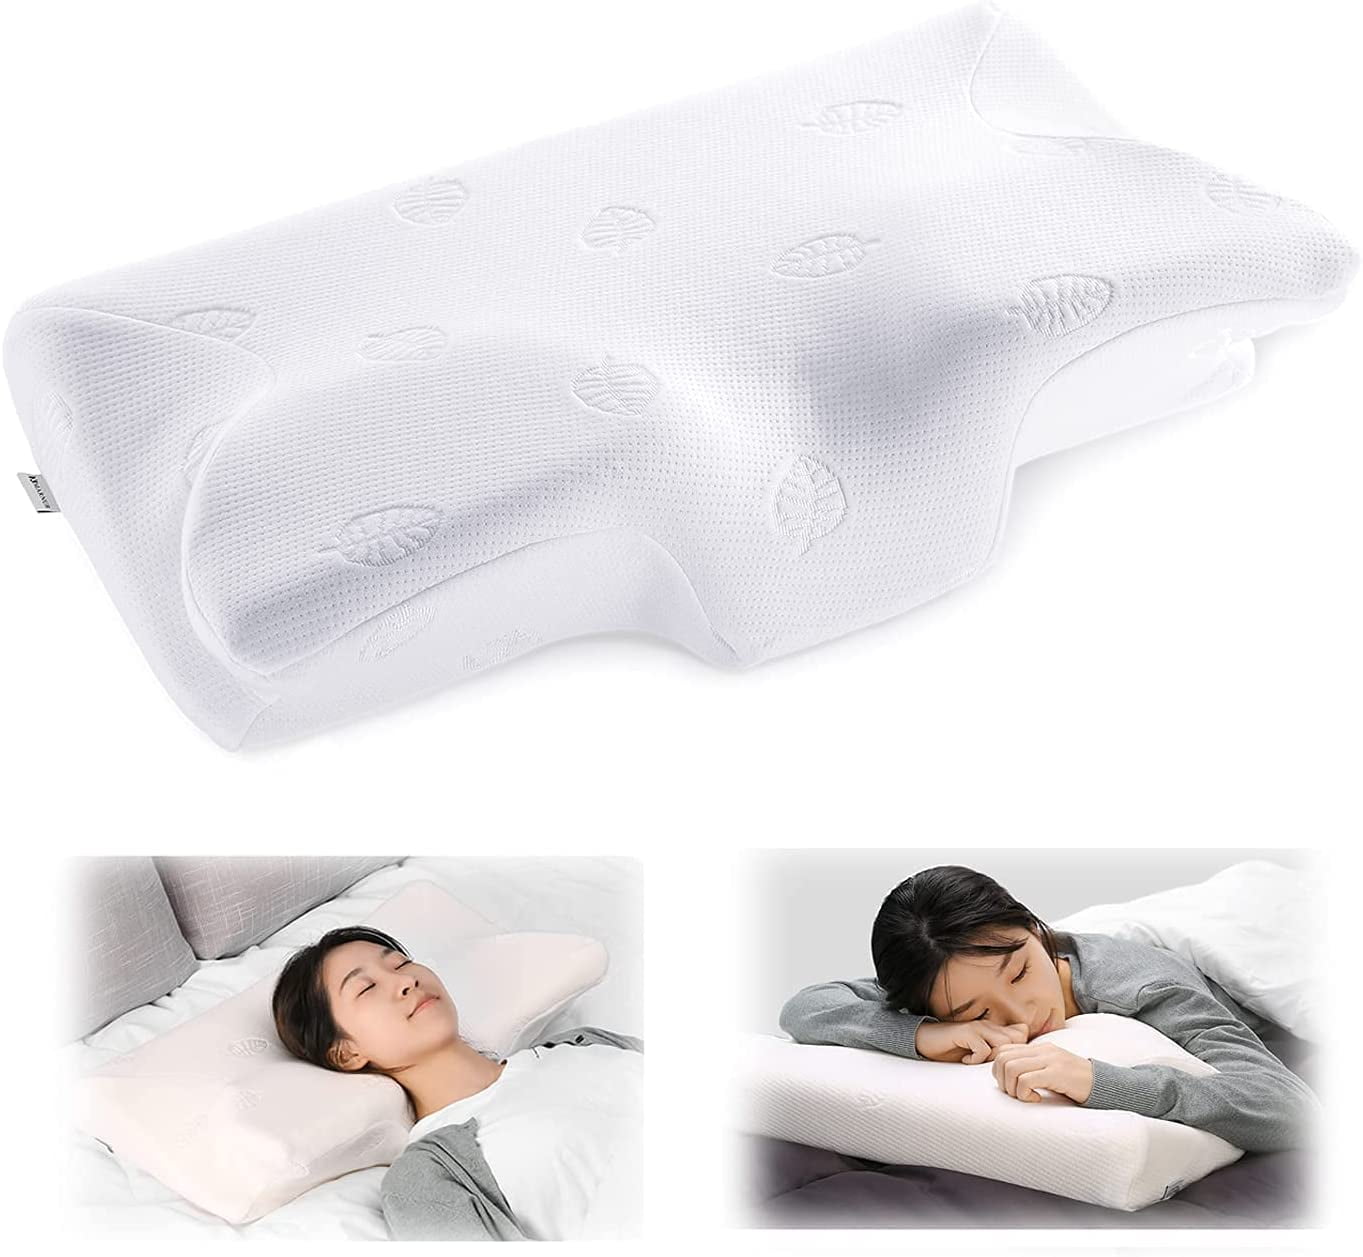 CONTOUR MEMORY FOAM PILLOW WITH COVER ORTHOPAEDIC HEAD NECK BACK SUPPORT PILLOWS 